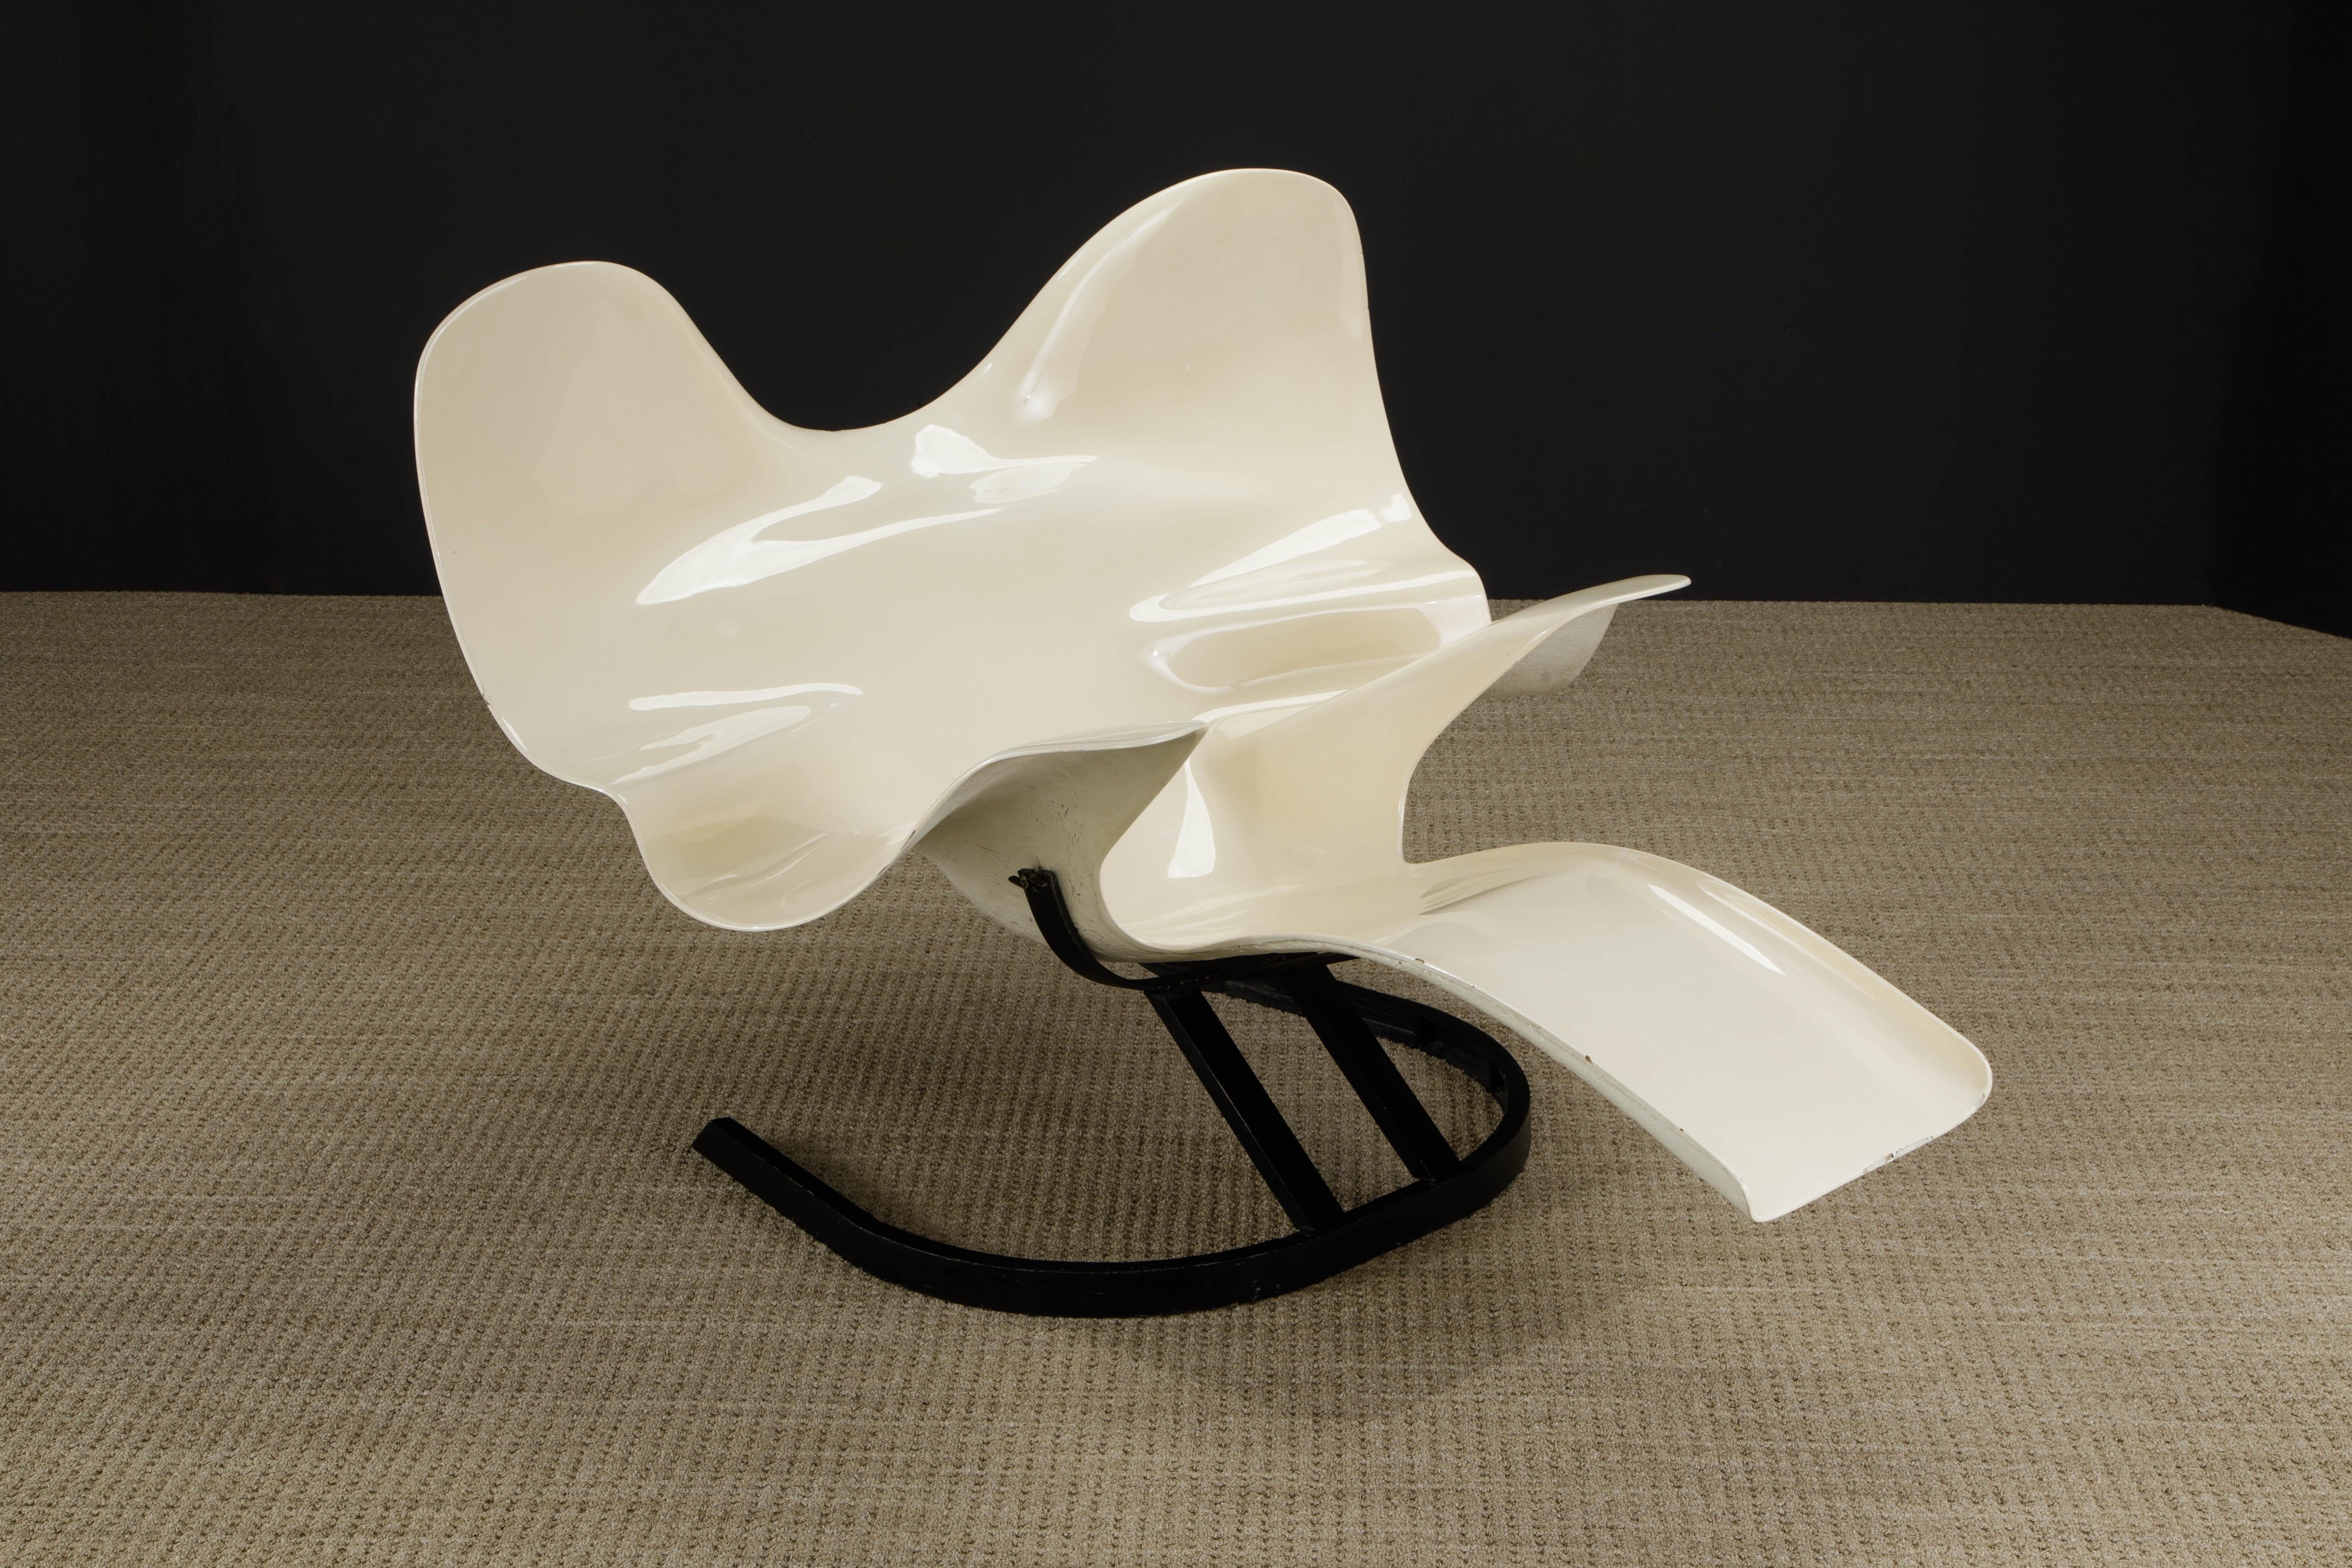 French Limited Edition 'Elephant Chair' by Bernard Rancillac, 1985, Signed & Numbered